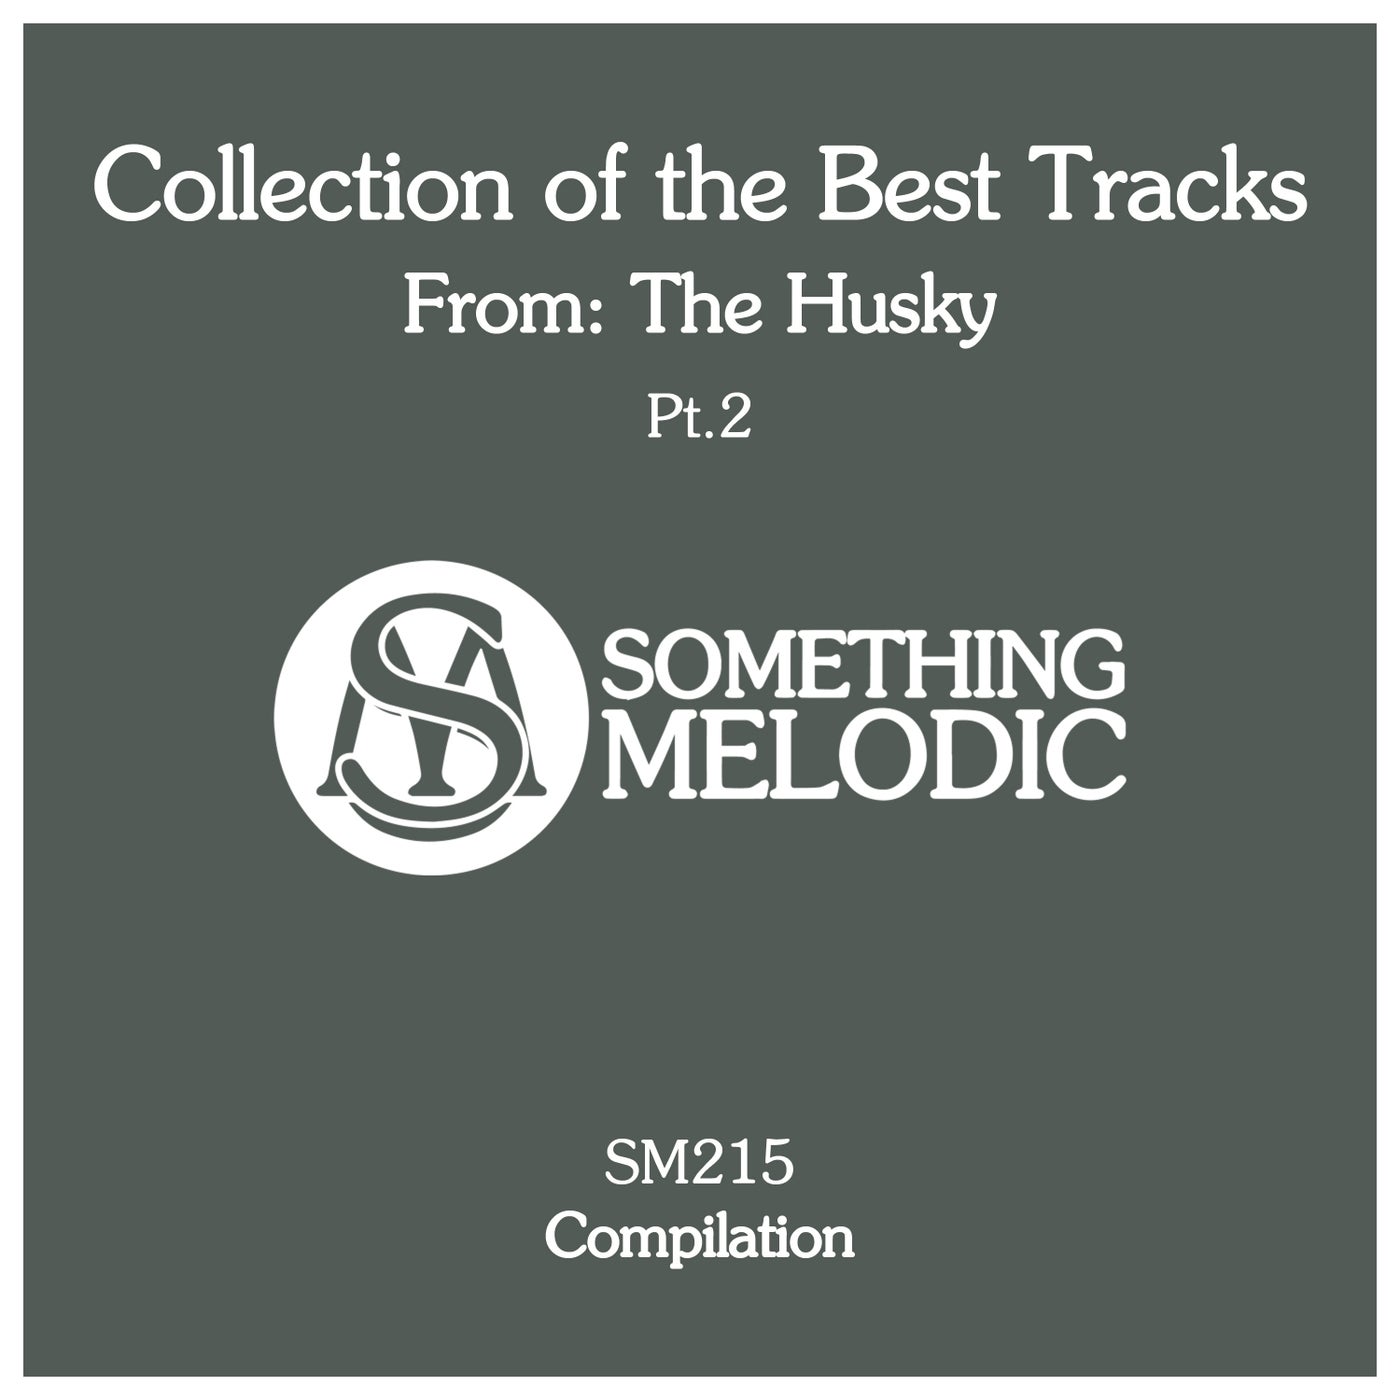 VA - Collection of the Best Tracks From: The Husky, Pt. 2 [SM215]